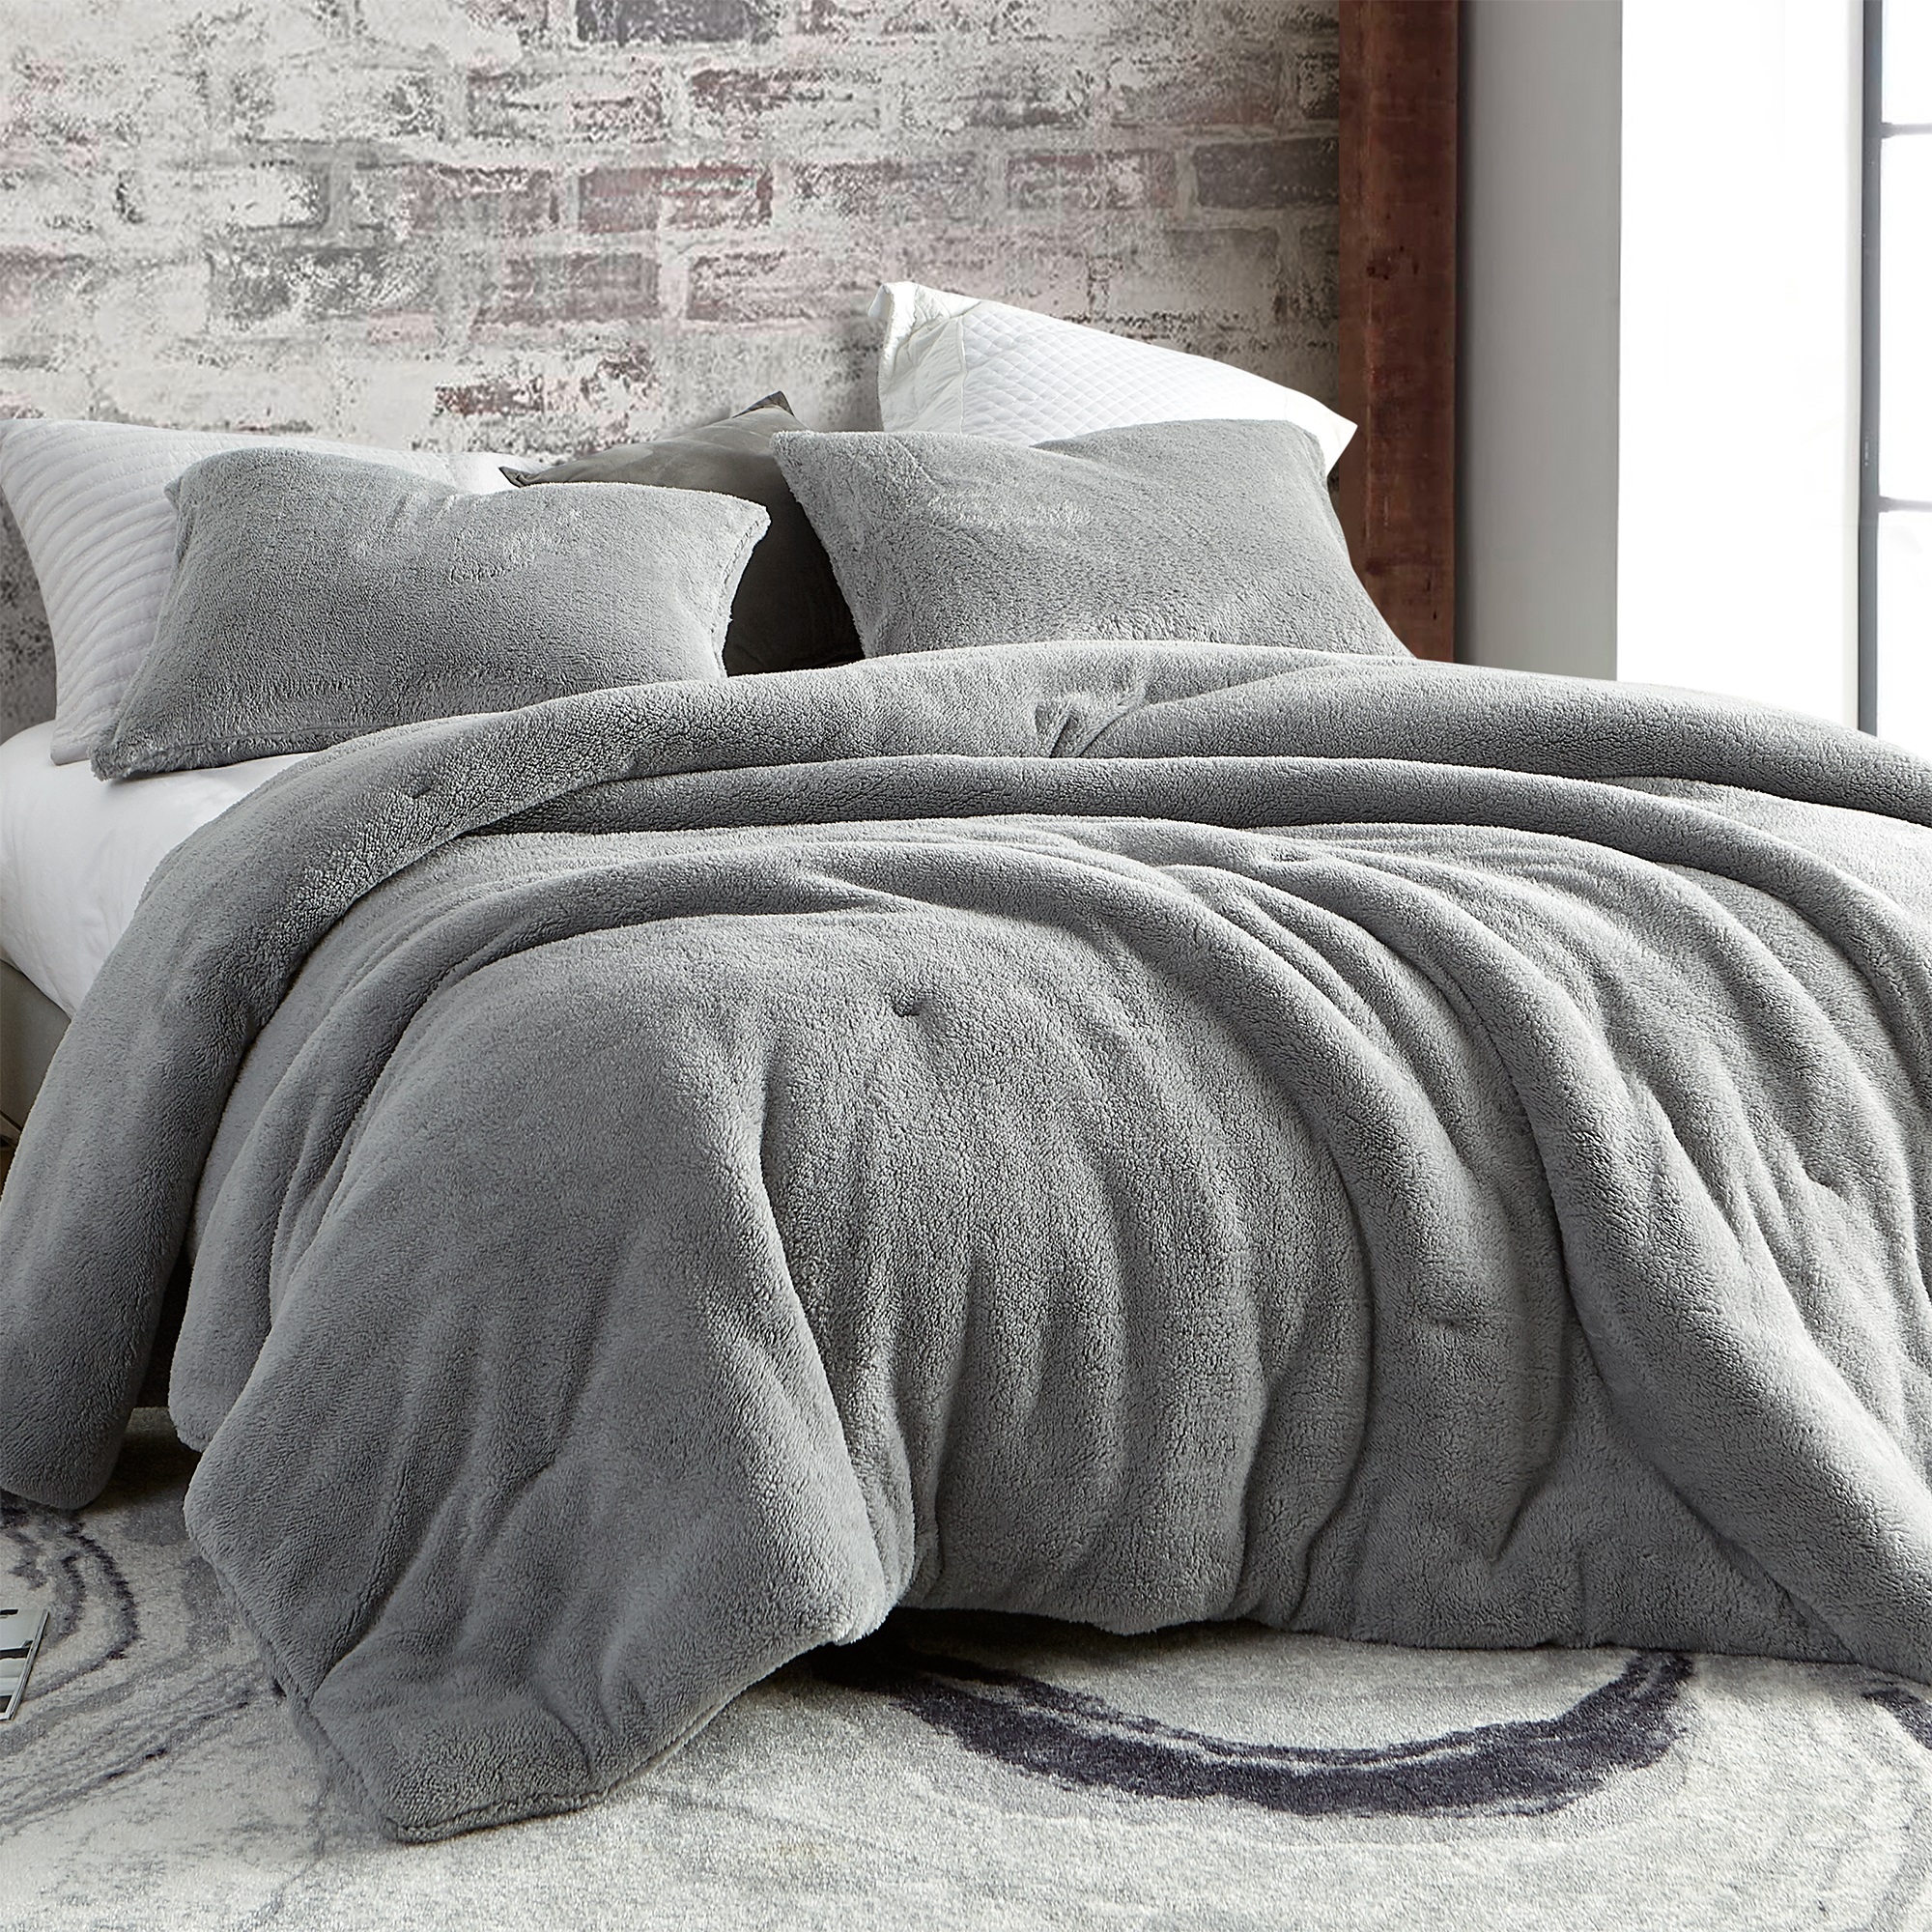 Coma Inducer  Oversized Comforter - Teddy Bear - Silver Gray